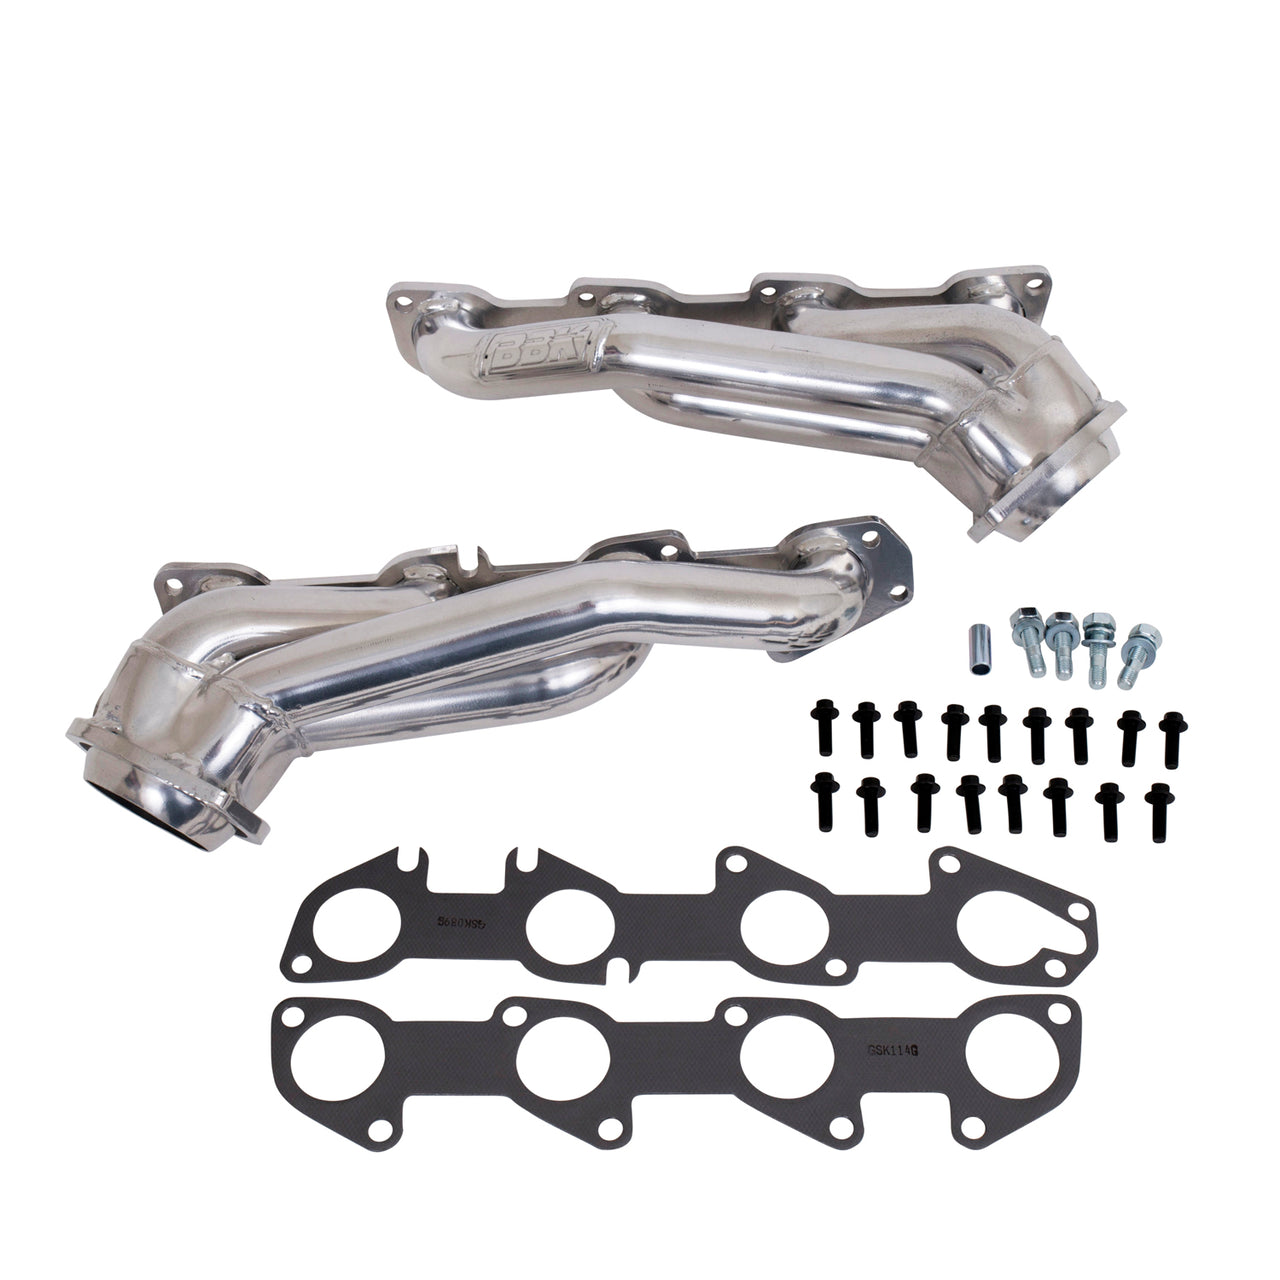 2005-2008 DODGE 5.7L CHALLENGER CHARGER HEMI CARS 1-3/4 SHORTY HEADERS (POLISHED SILVER CERAMIC)